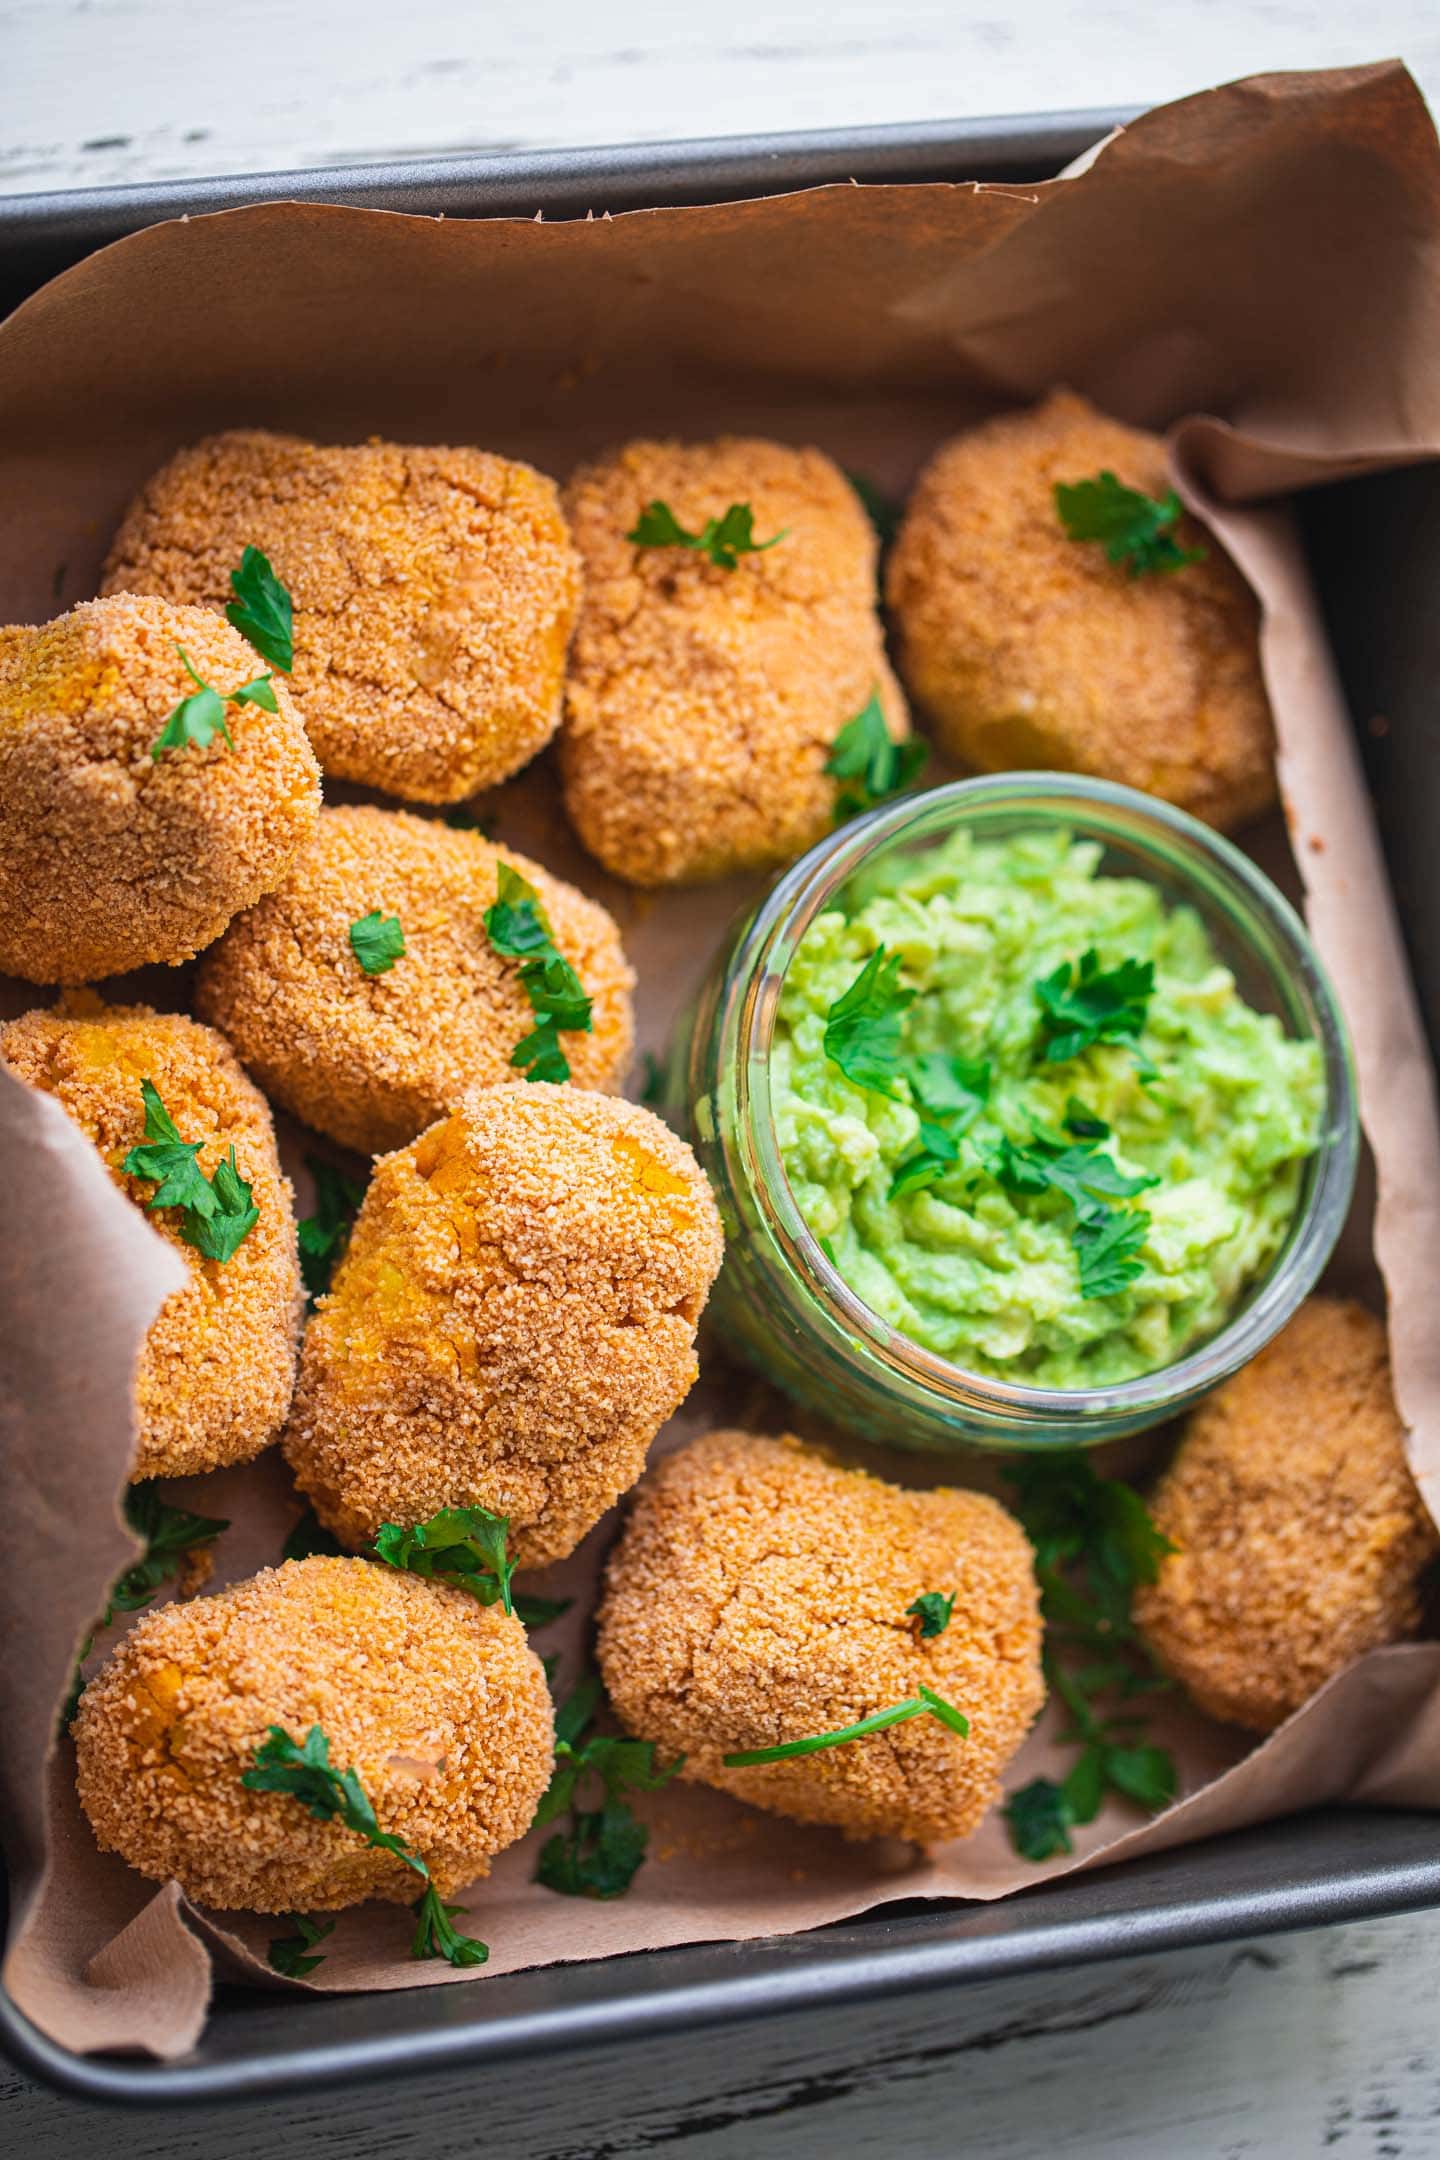 Vegan chicken nuggets made from tofu and chickpeas